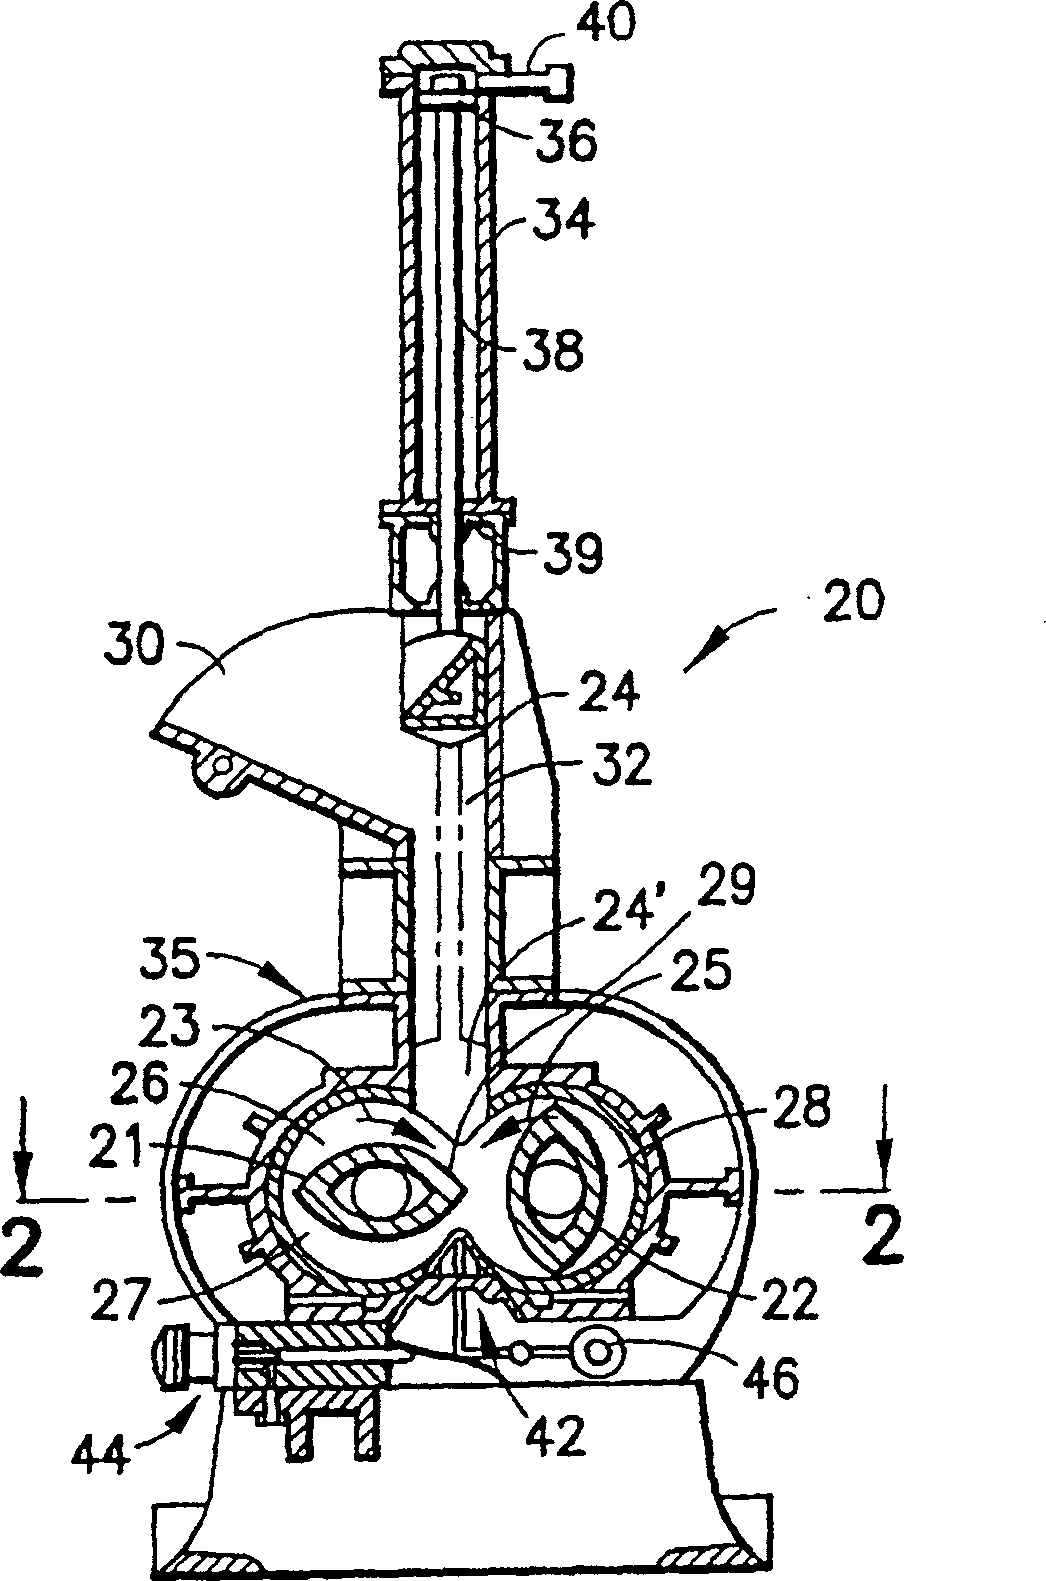 Four wing non-intermeshing mixer rotary drum for synchronous drive and mixer